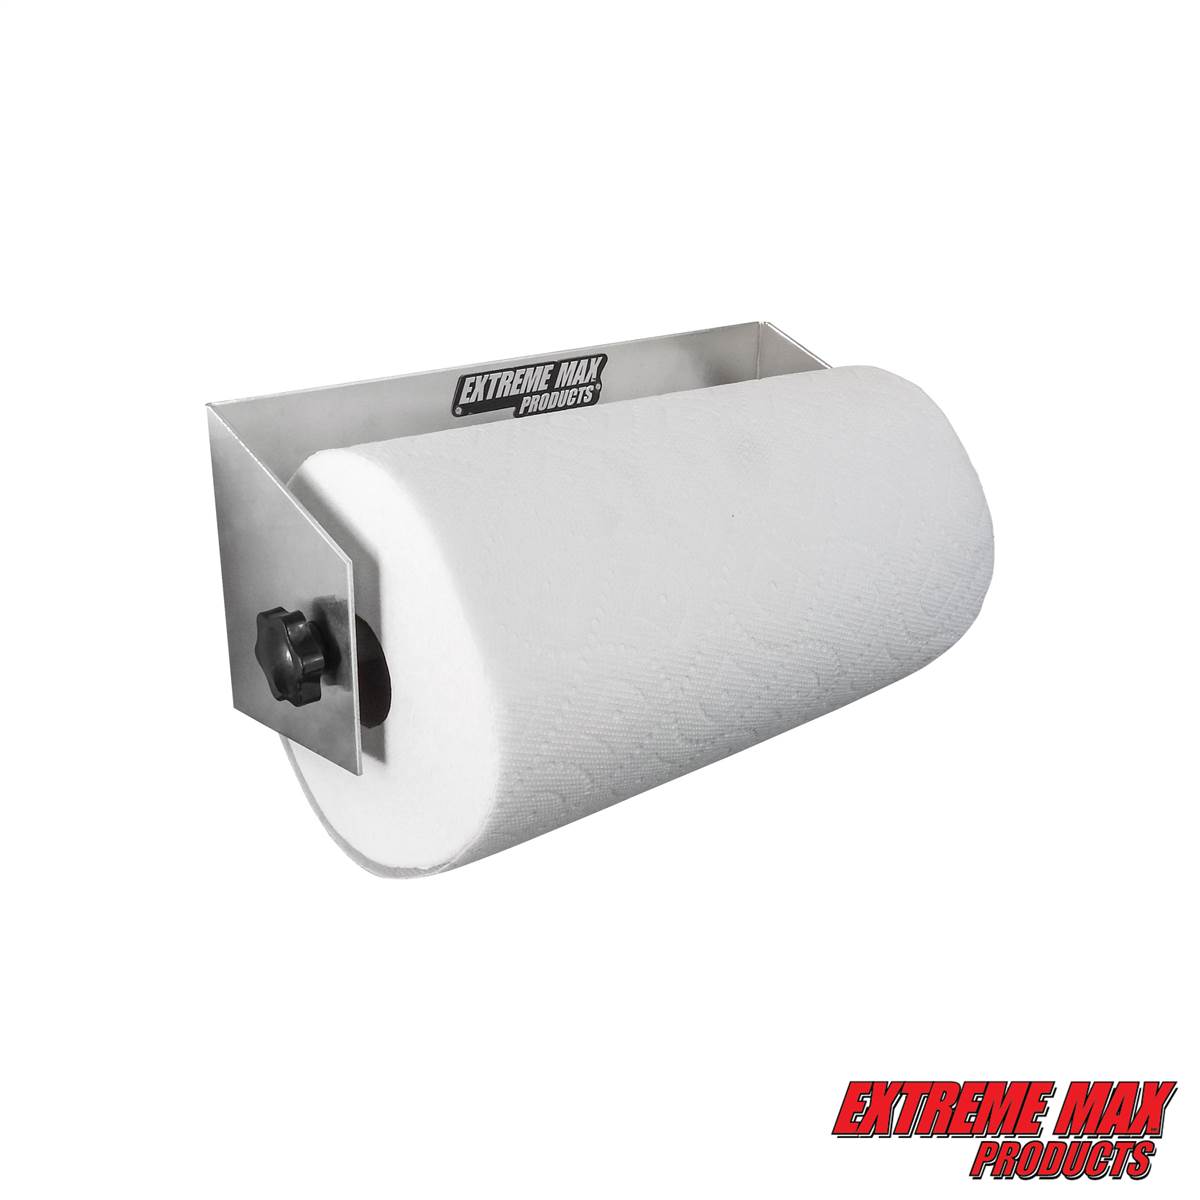 Extreme Max 5001.6094 Aluminum Wall-Mount Paper Towel Holder for Enclosed  Trailer, Shop, Garage, Storage - Silver